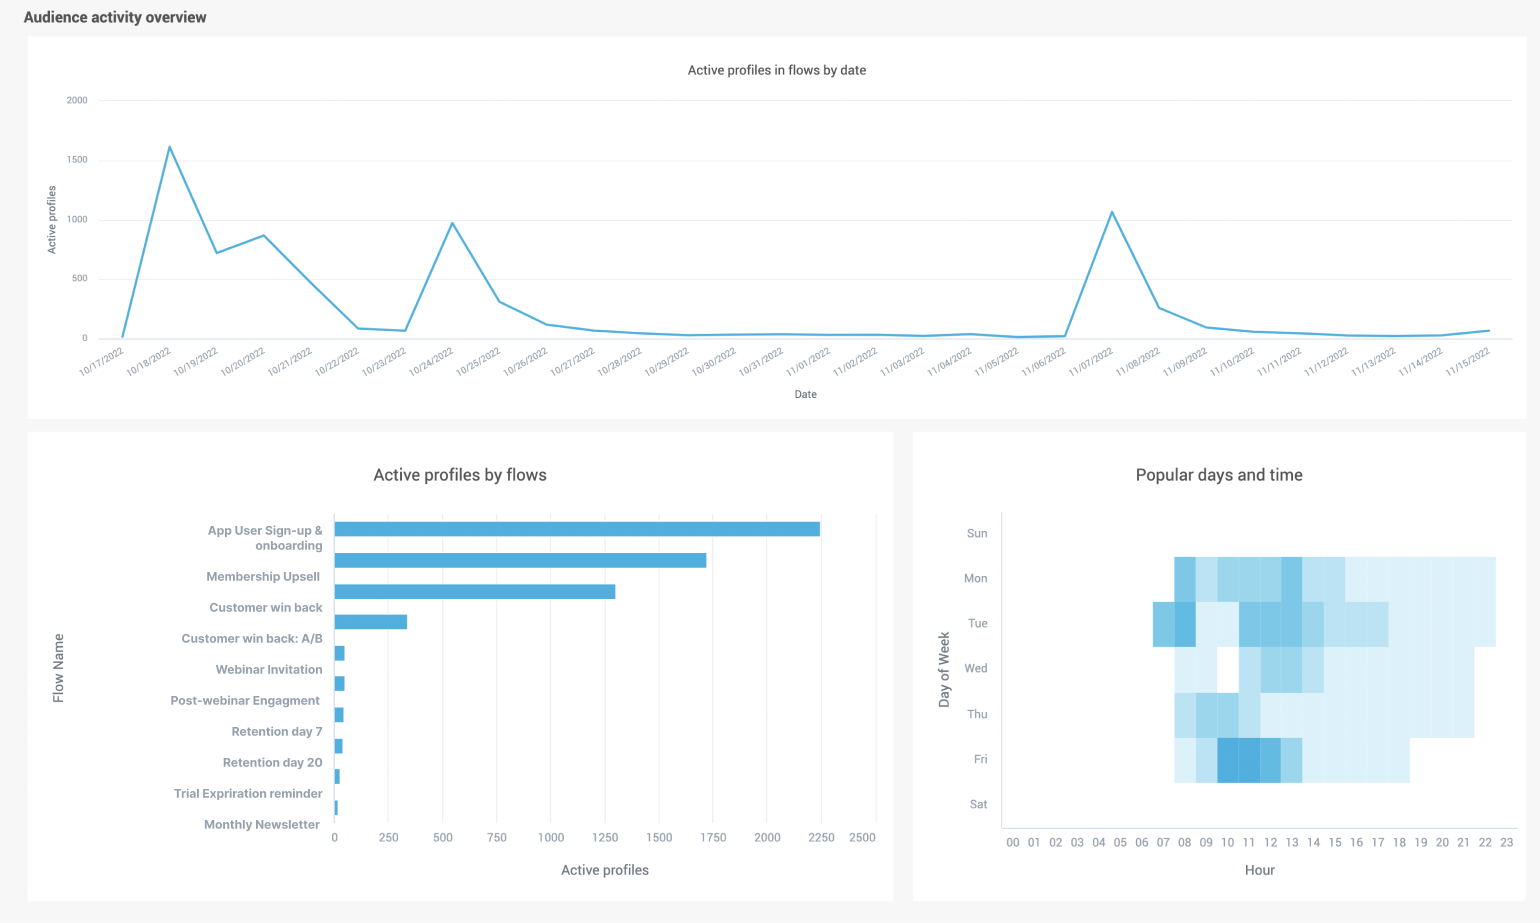 moments-analytics-audience-activity-overview